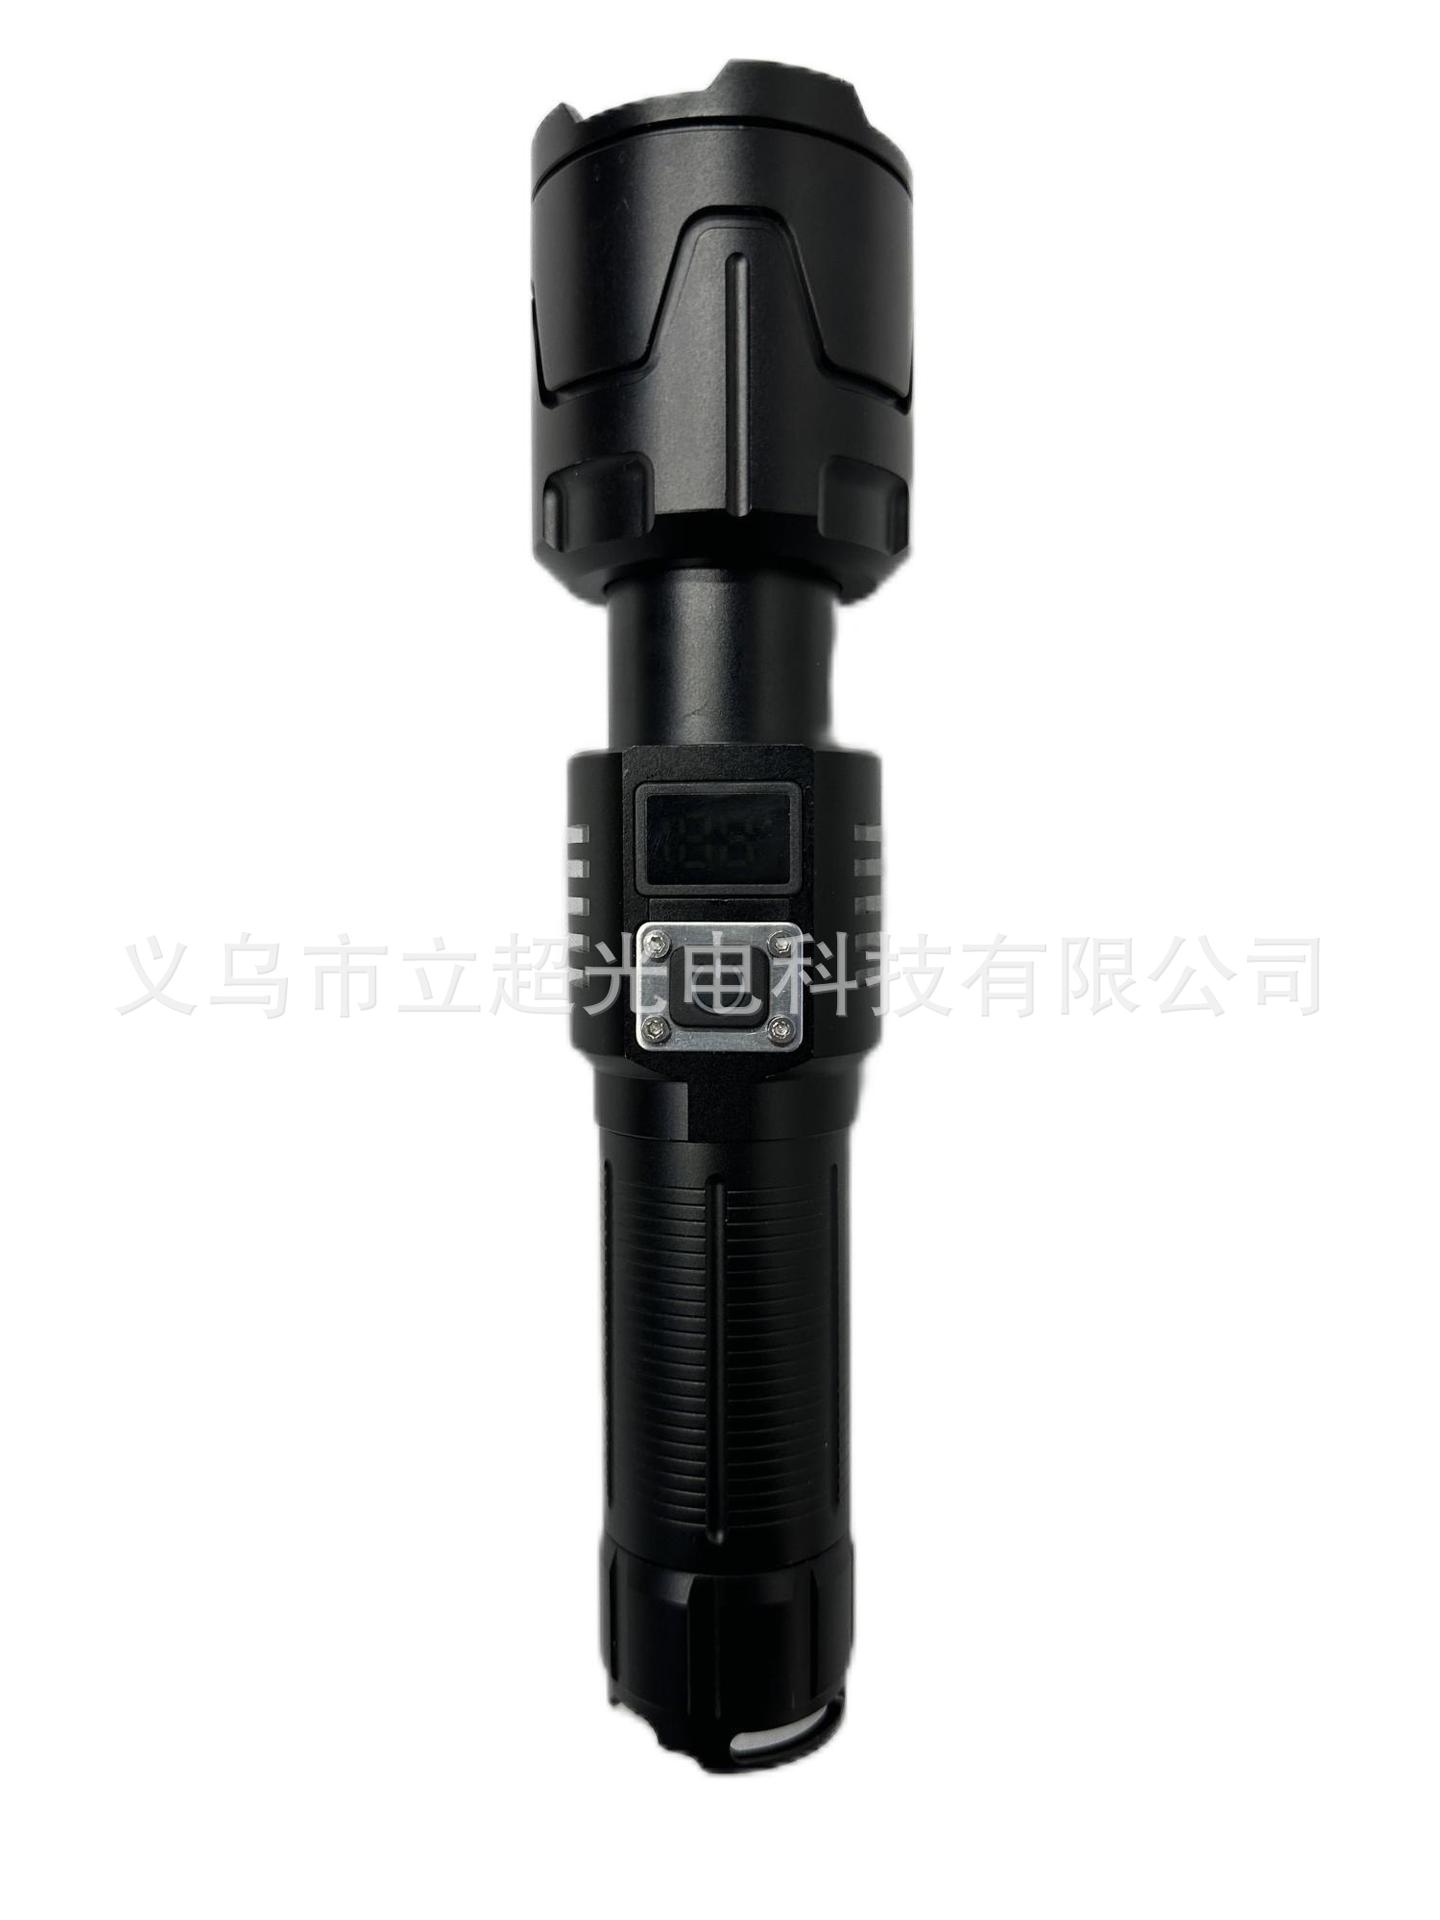 New Portable Flashlight Vertical Super LED Power Torch Outdoor Camping Multifunctional Waterproof High Power